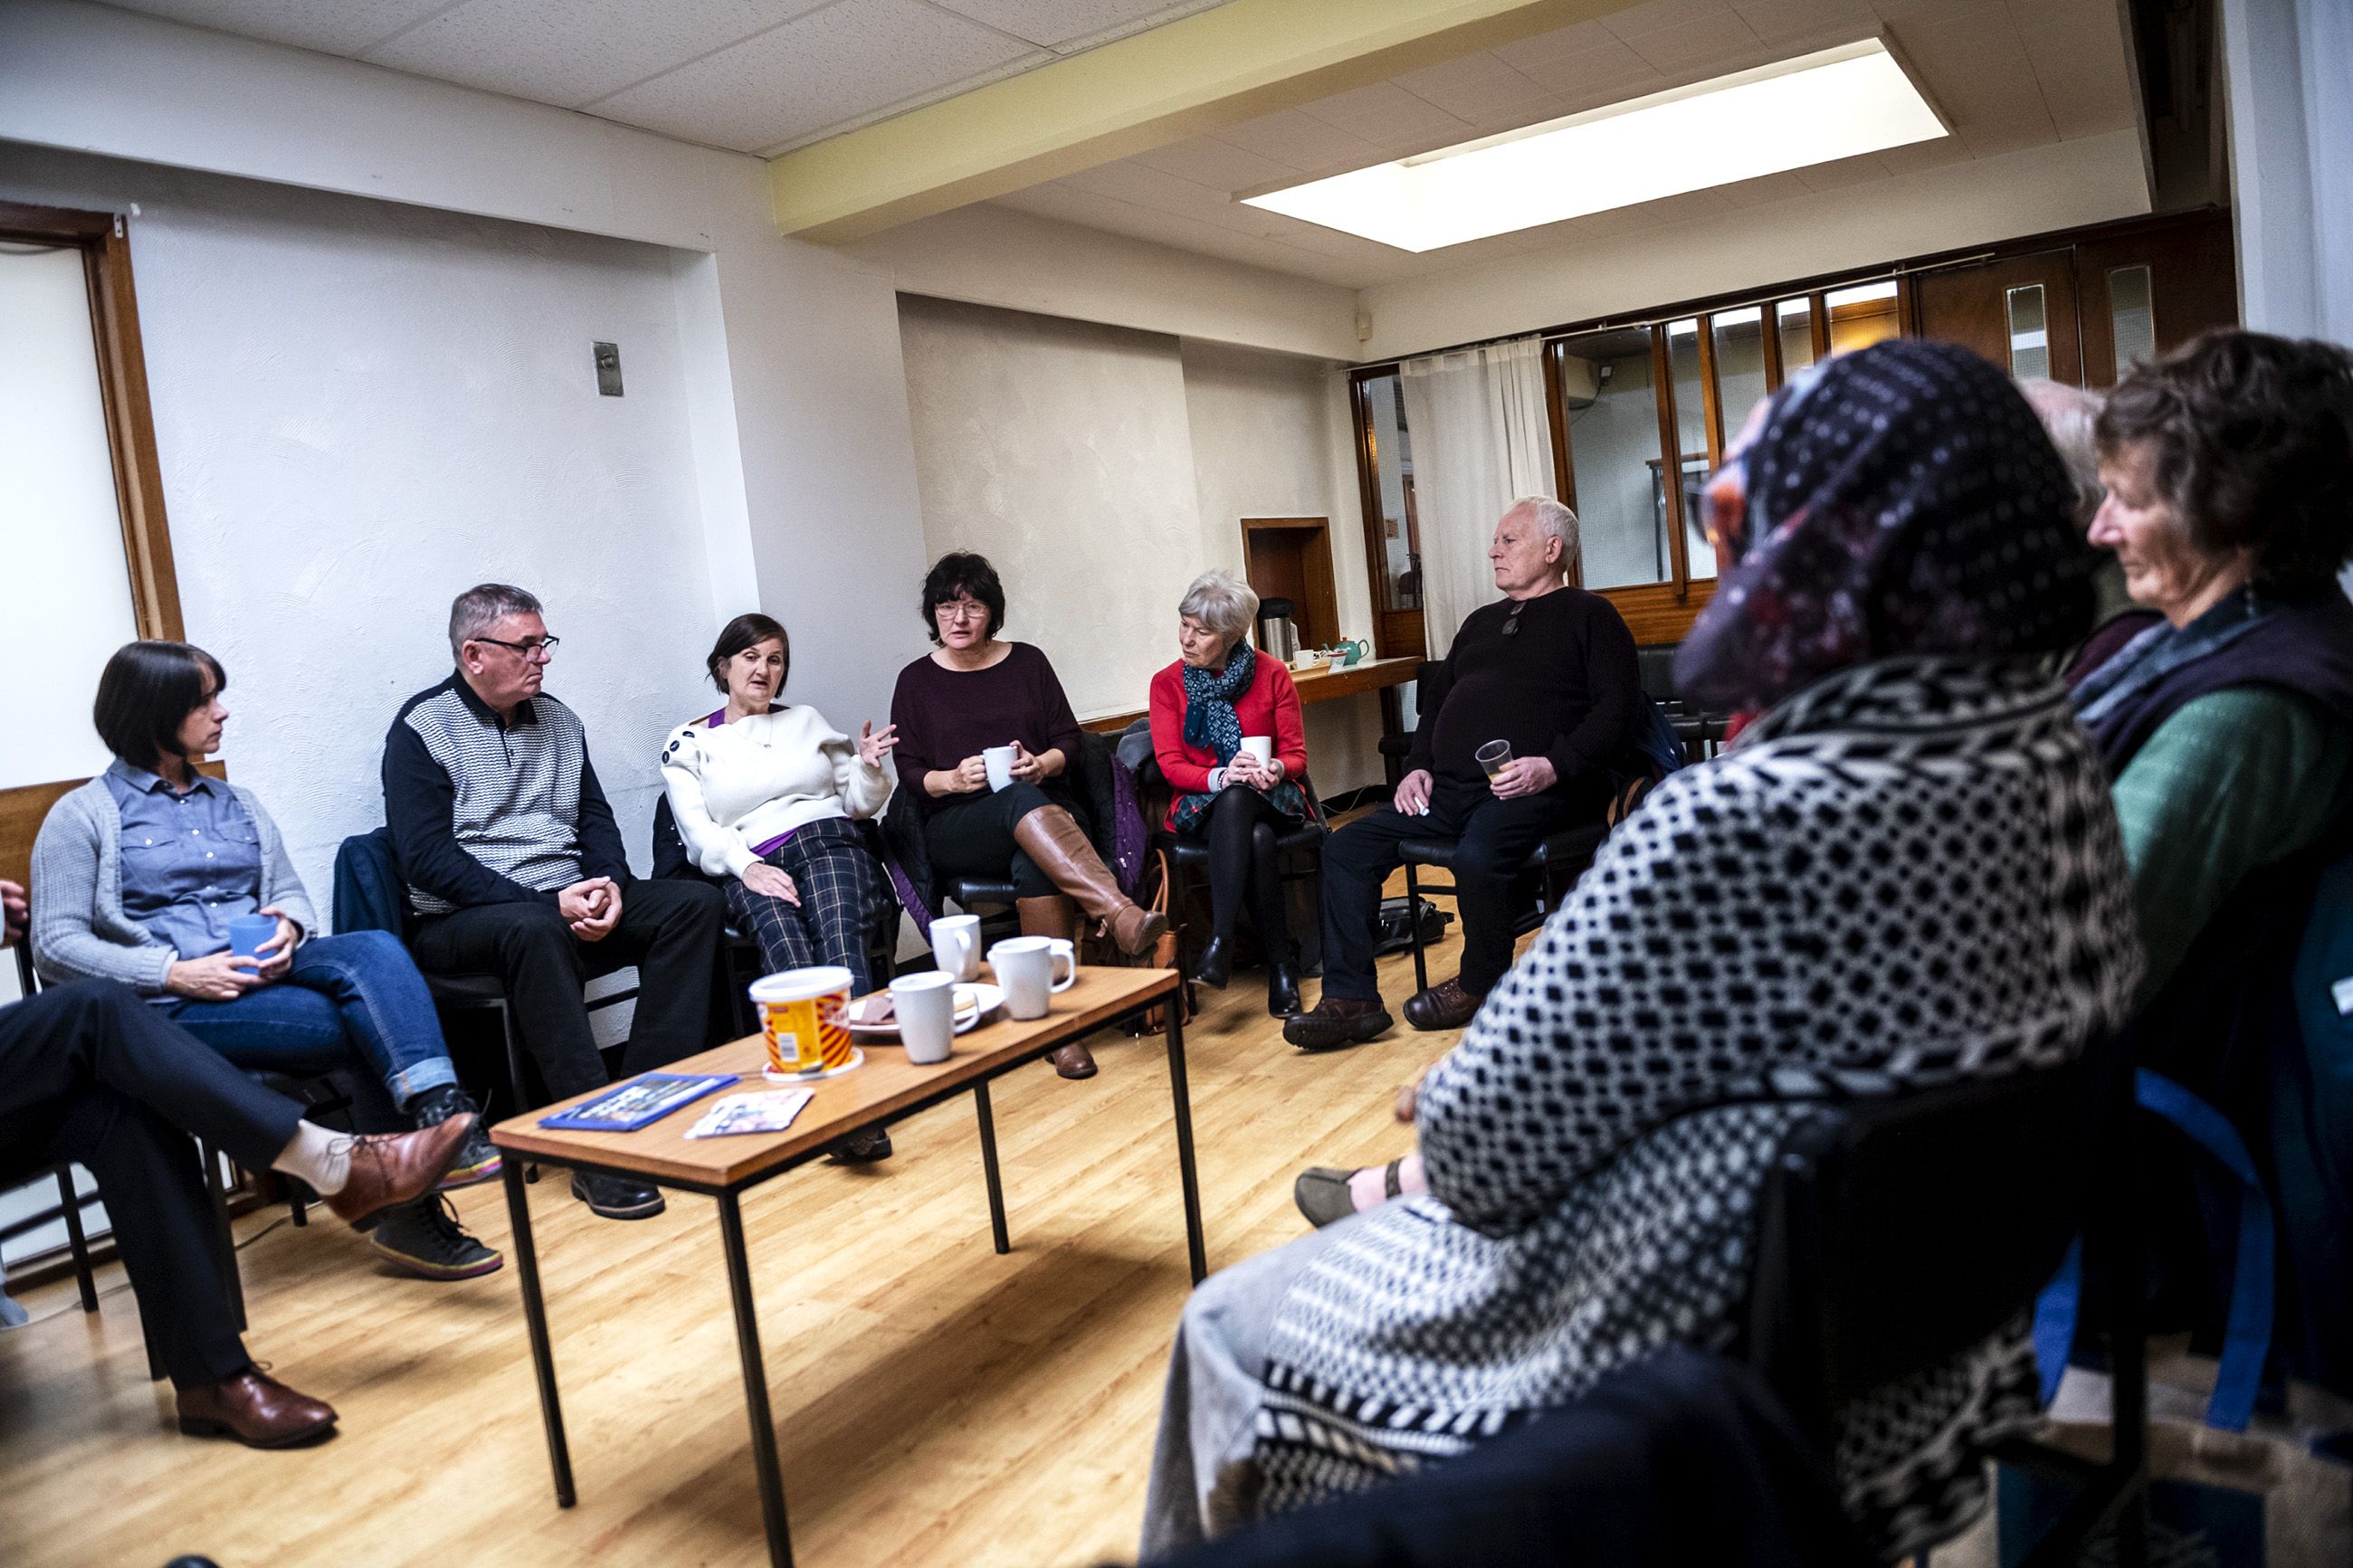 People meet for the monthly Poverty Truth Community meeting at The Pyramid at Anderston in Glasgow, Scotland. The Poverty Truth Community is an organization that helps people overcome poverty in Scotland. Image by Michael Santiago. United Kingdom, 2019.